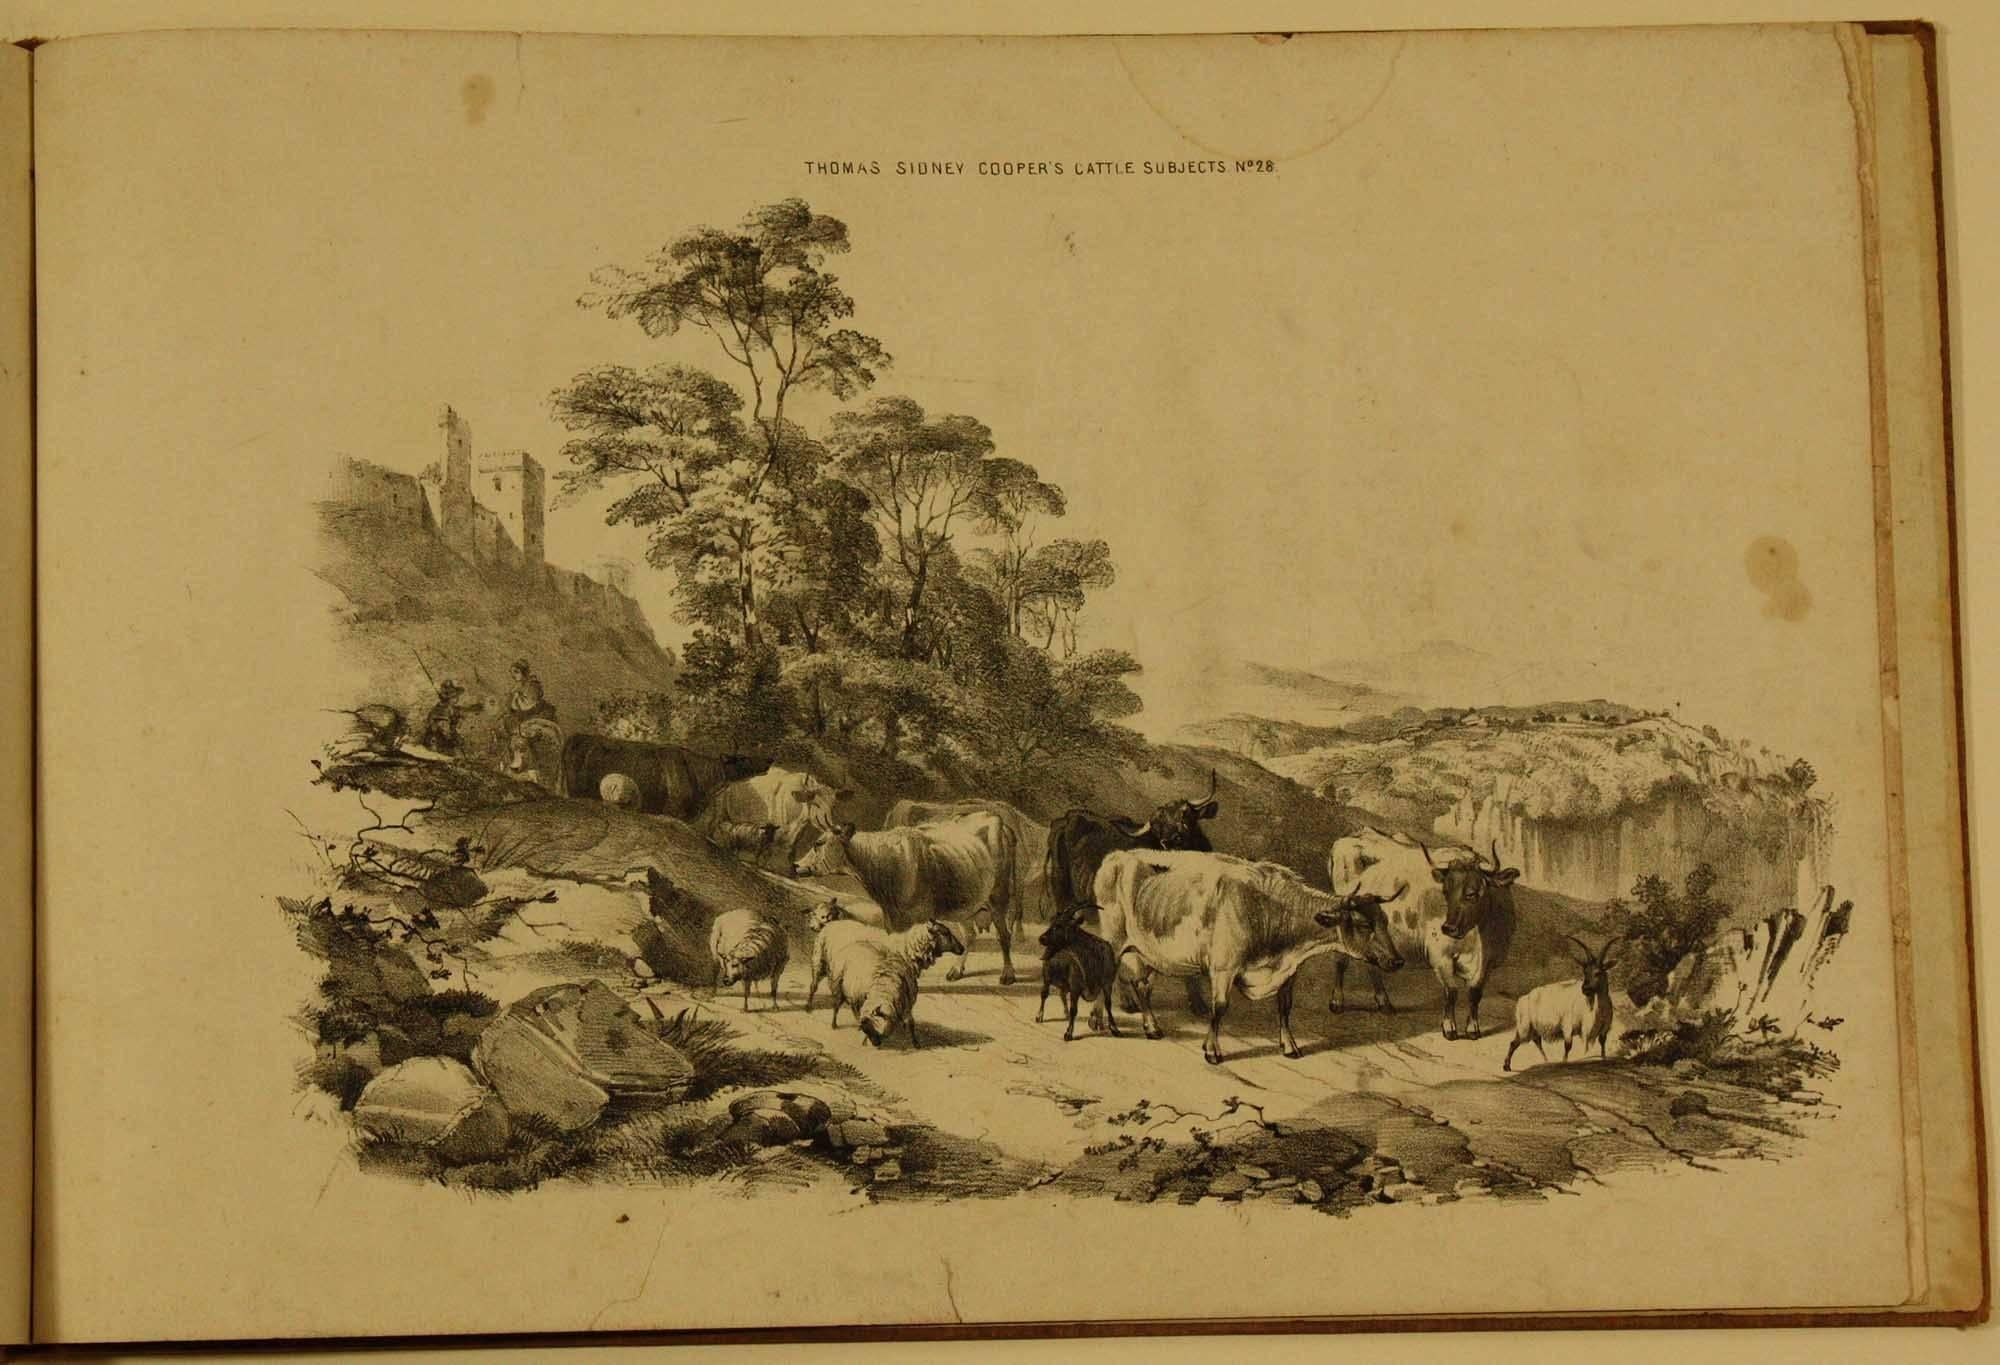 Thomas Sidney Cooper Animal Print - COOPER, Thomas Sidney  Groups of Cattle, Drawn from Nature Book 1839 London